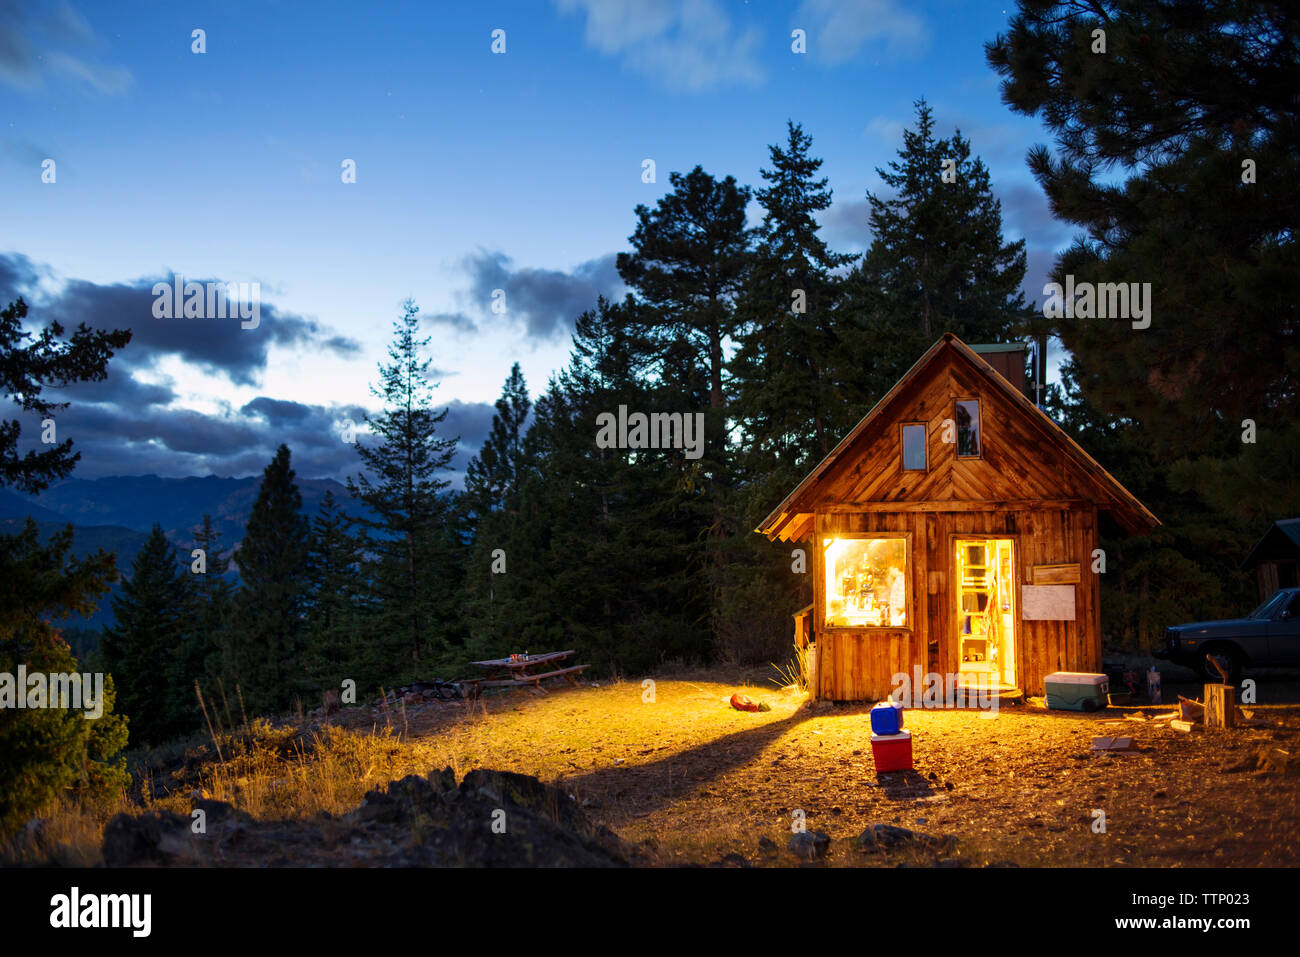 Illuminated wooden cabin in forest at night Stock Photo - Alamy